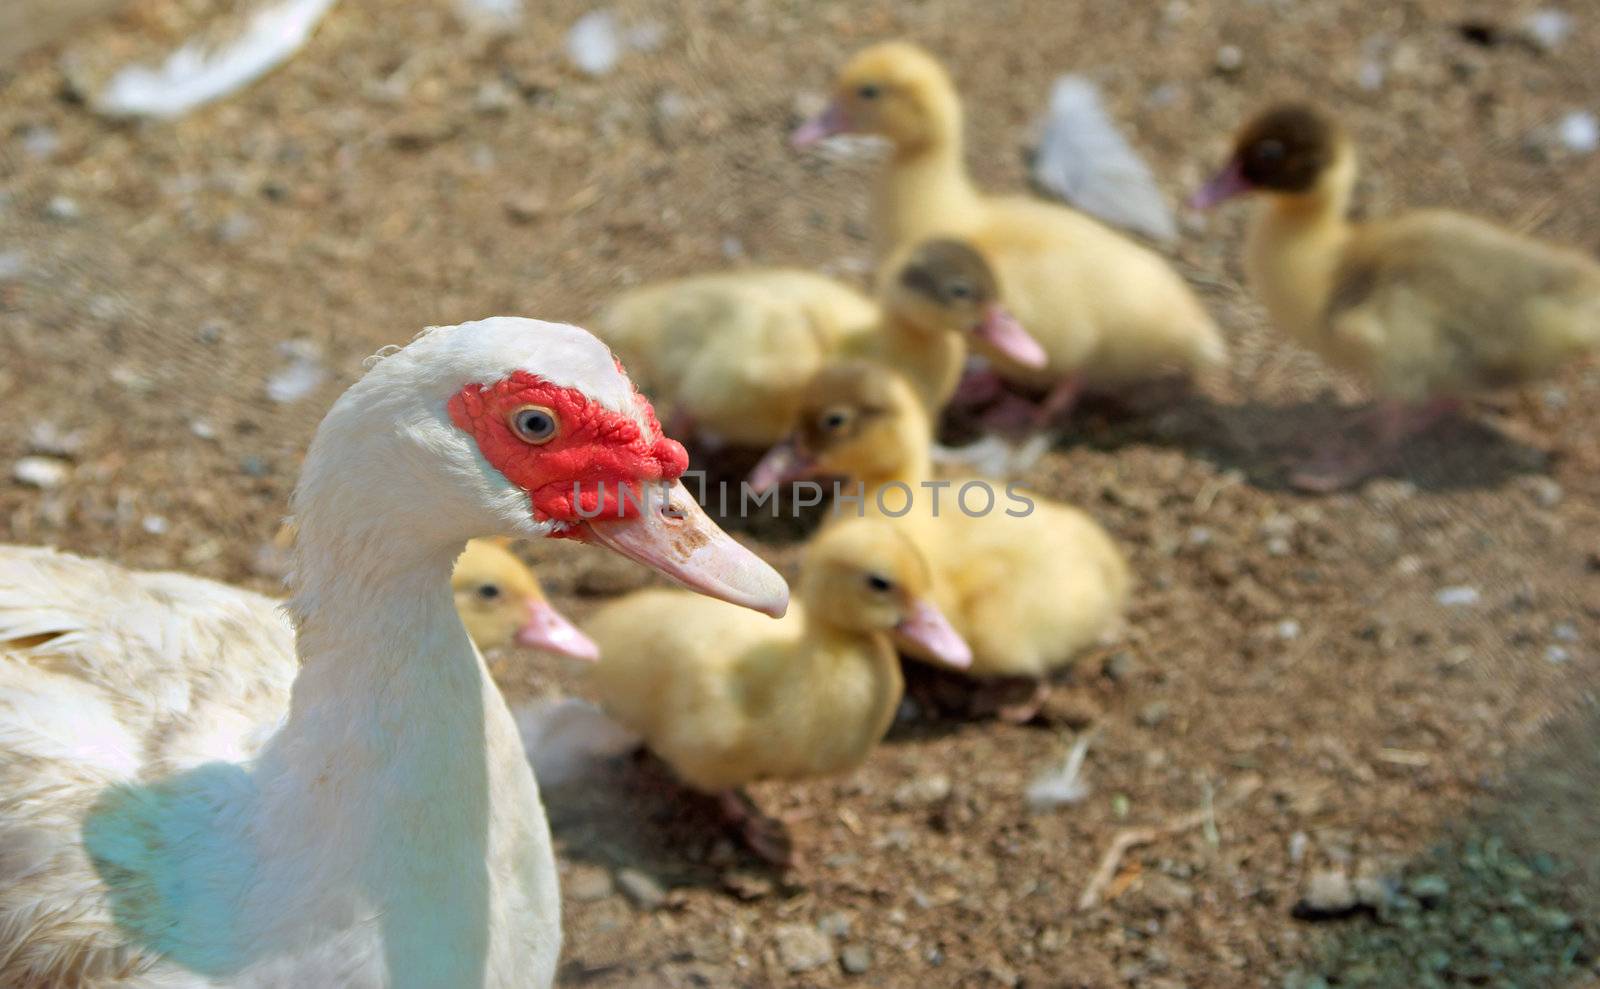 mother duck by clearviewstock